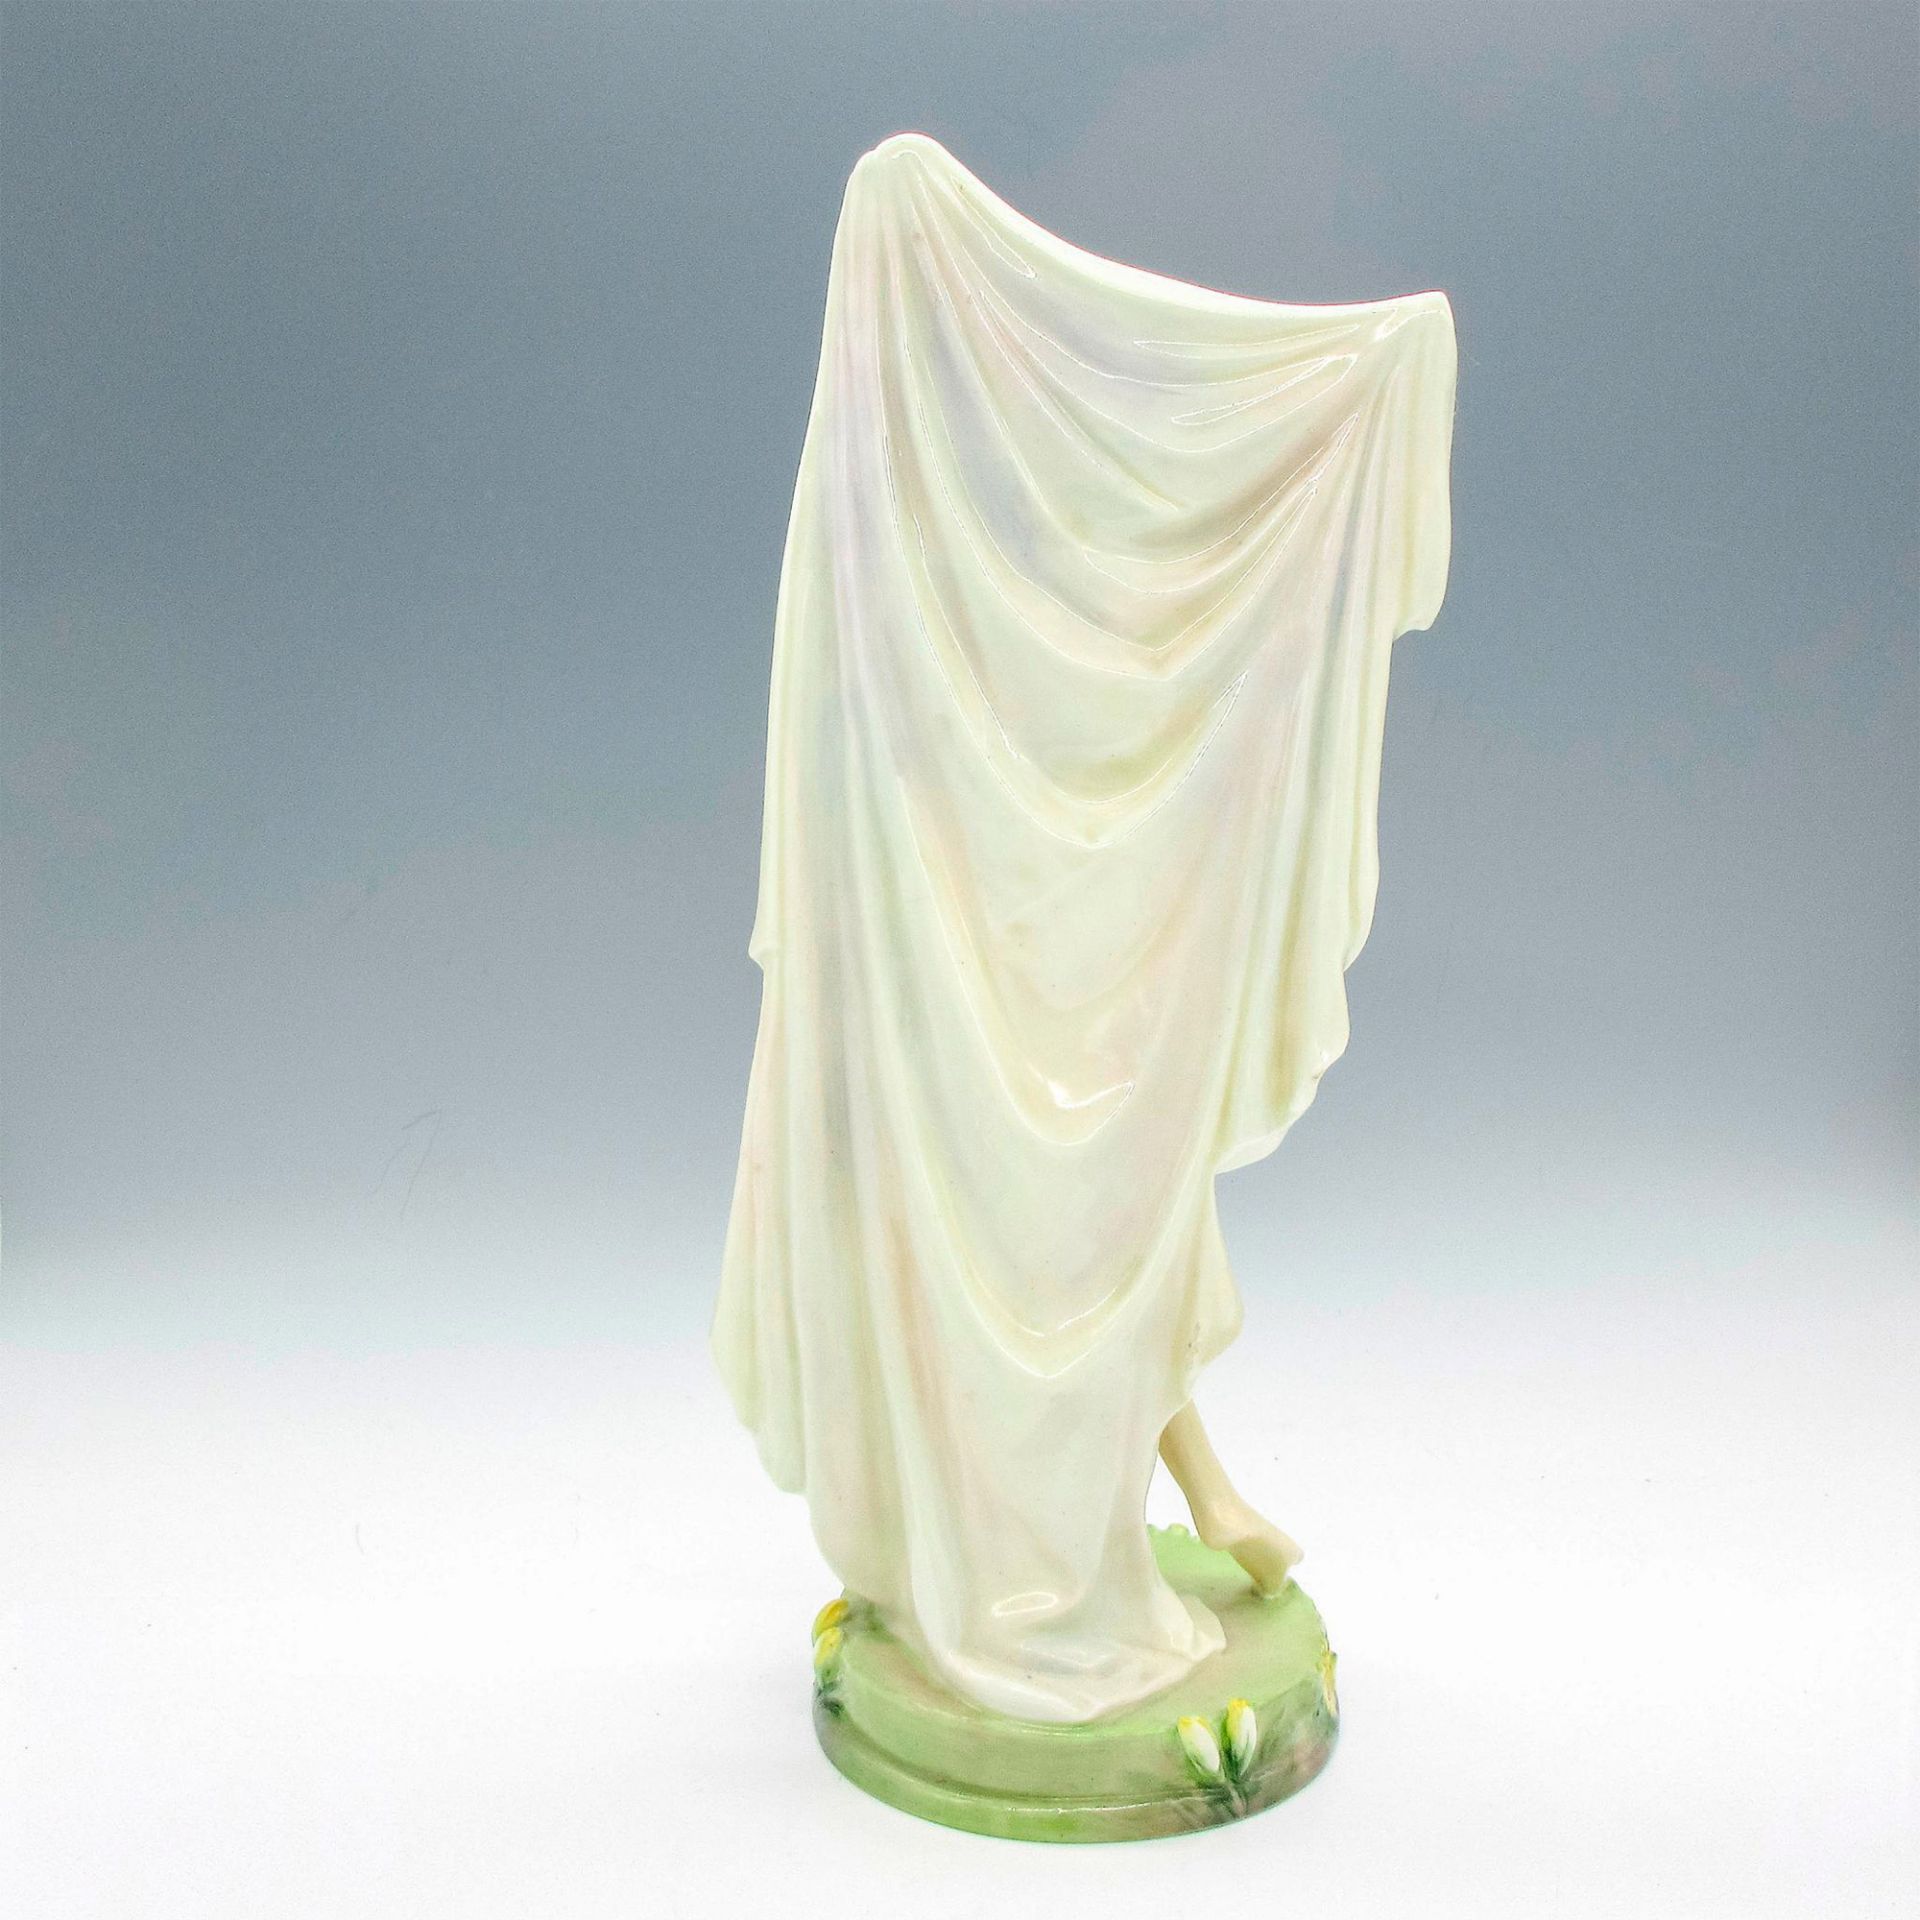 Coming of Spring HN1723 - Royal Doulton Figurine - Image 2 of 3